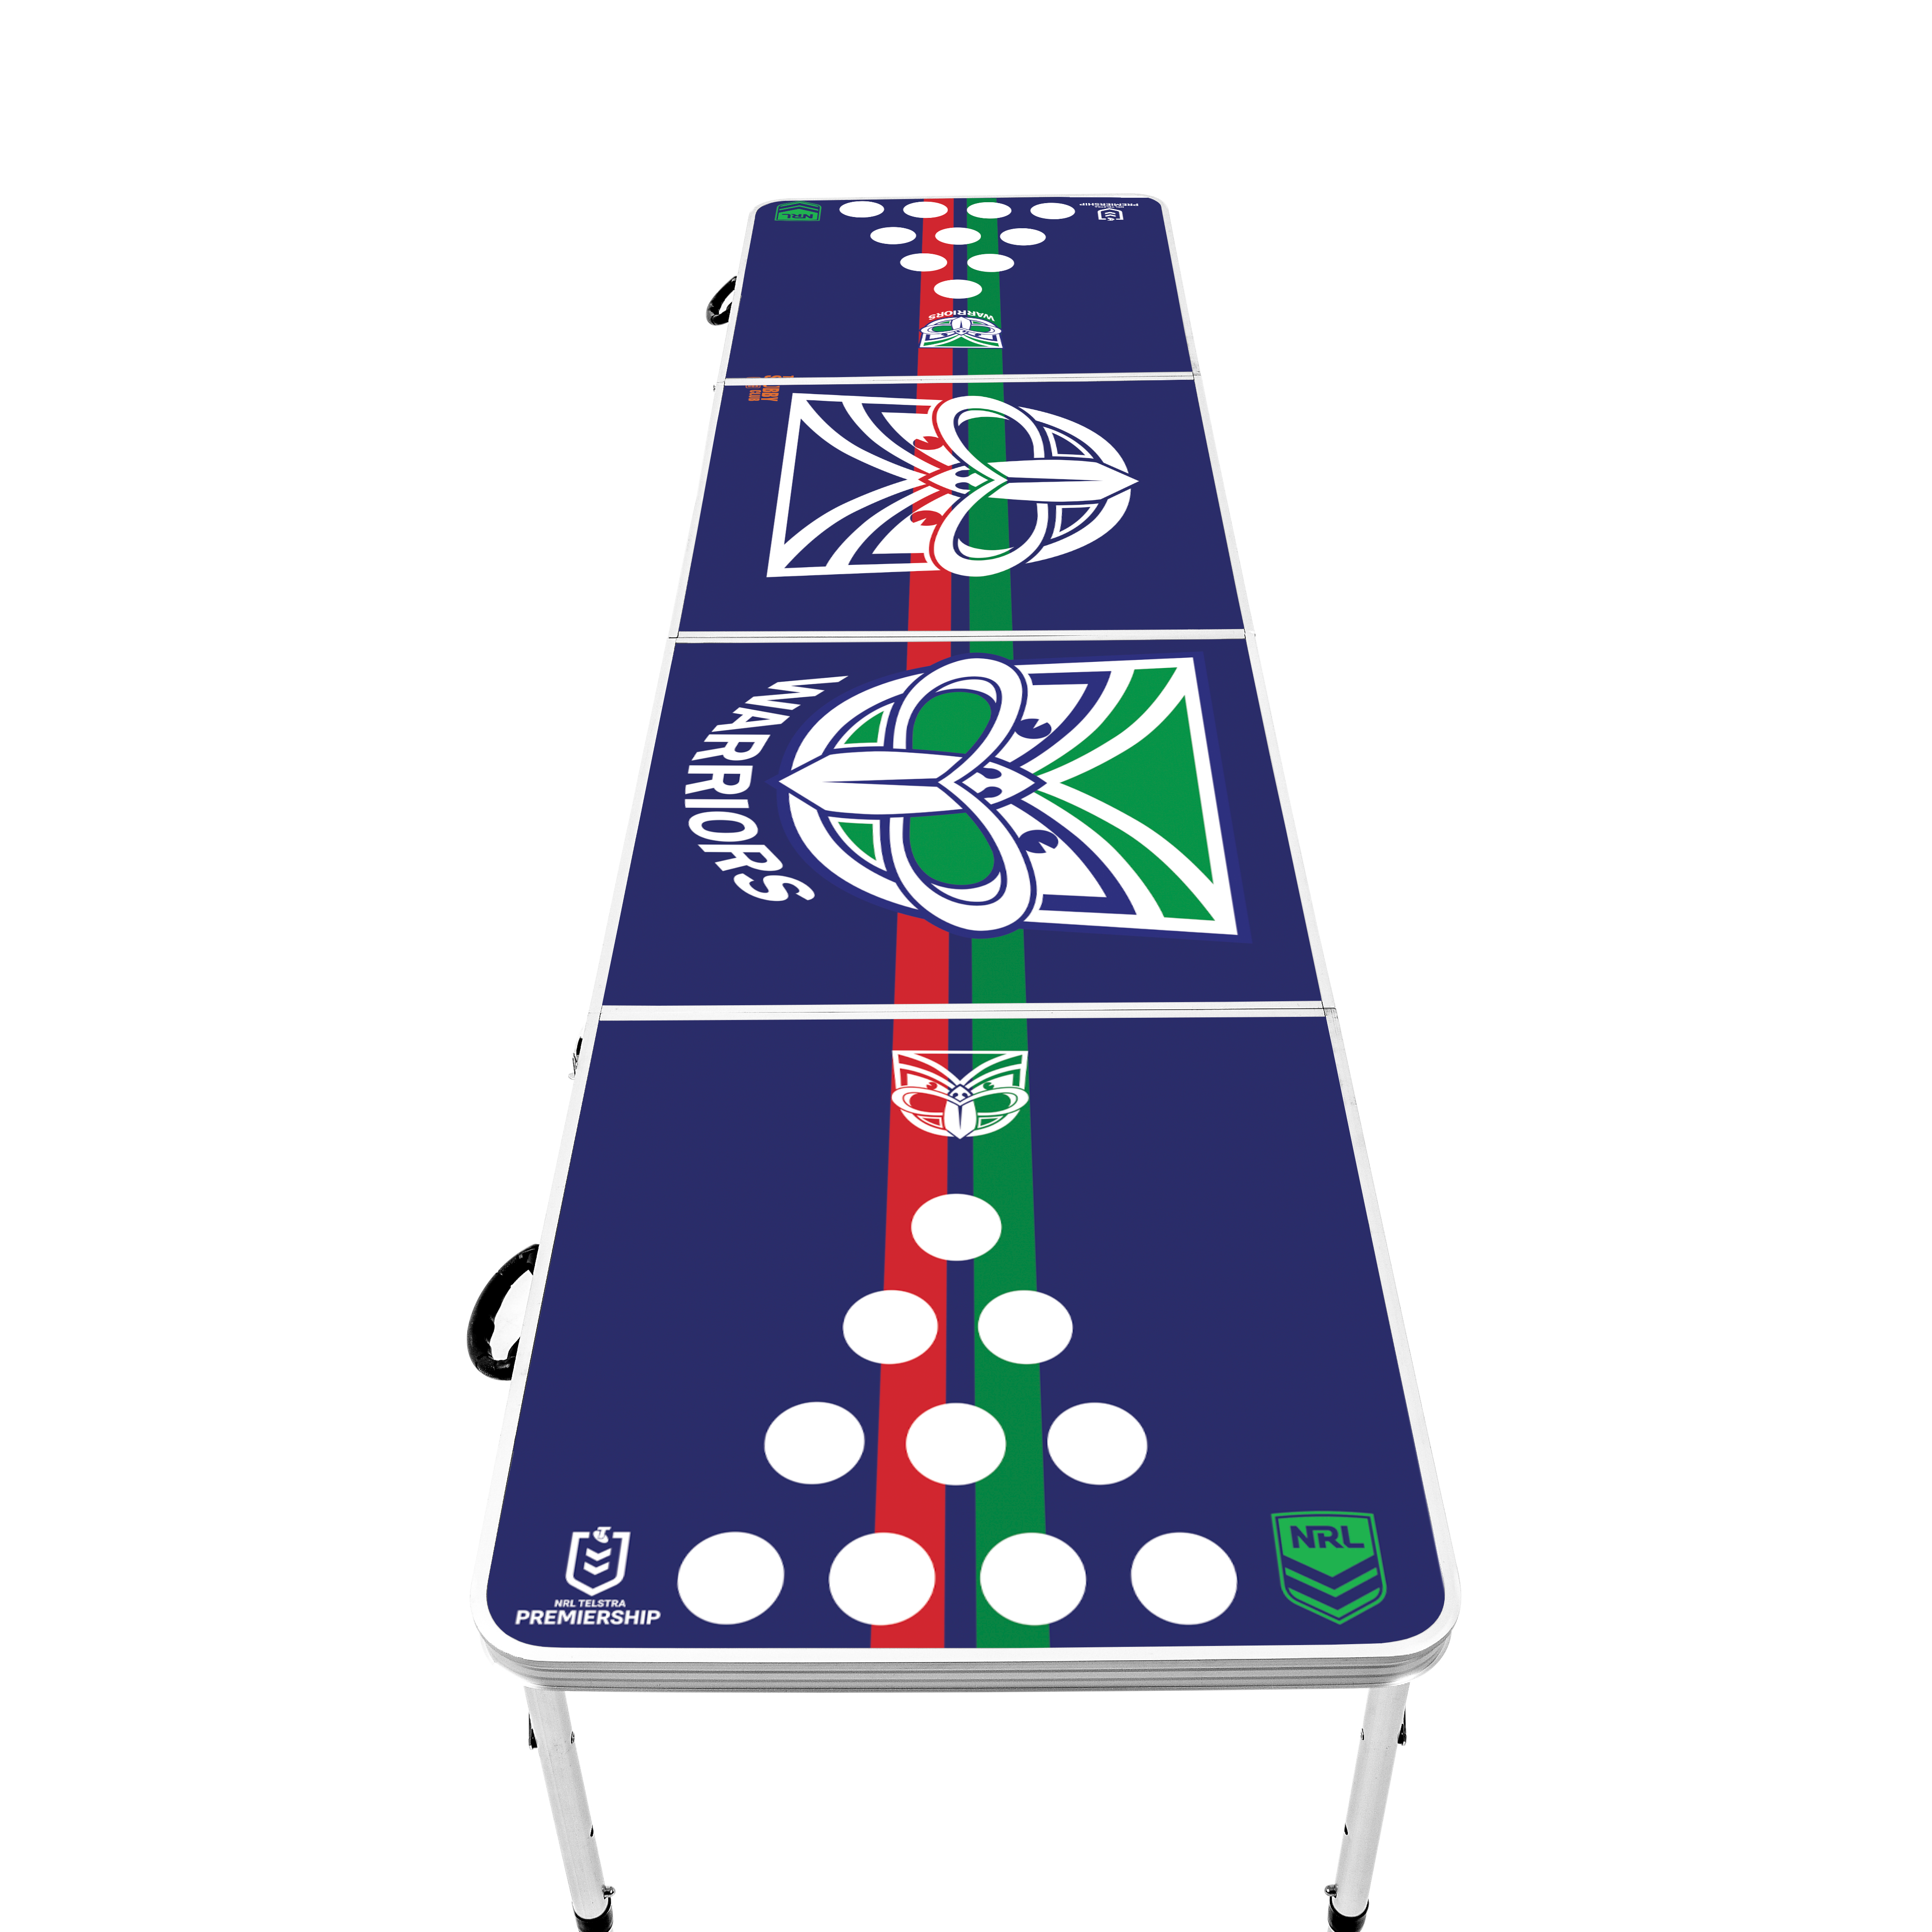 New Zealand Warriors NRL Beer Pong Table